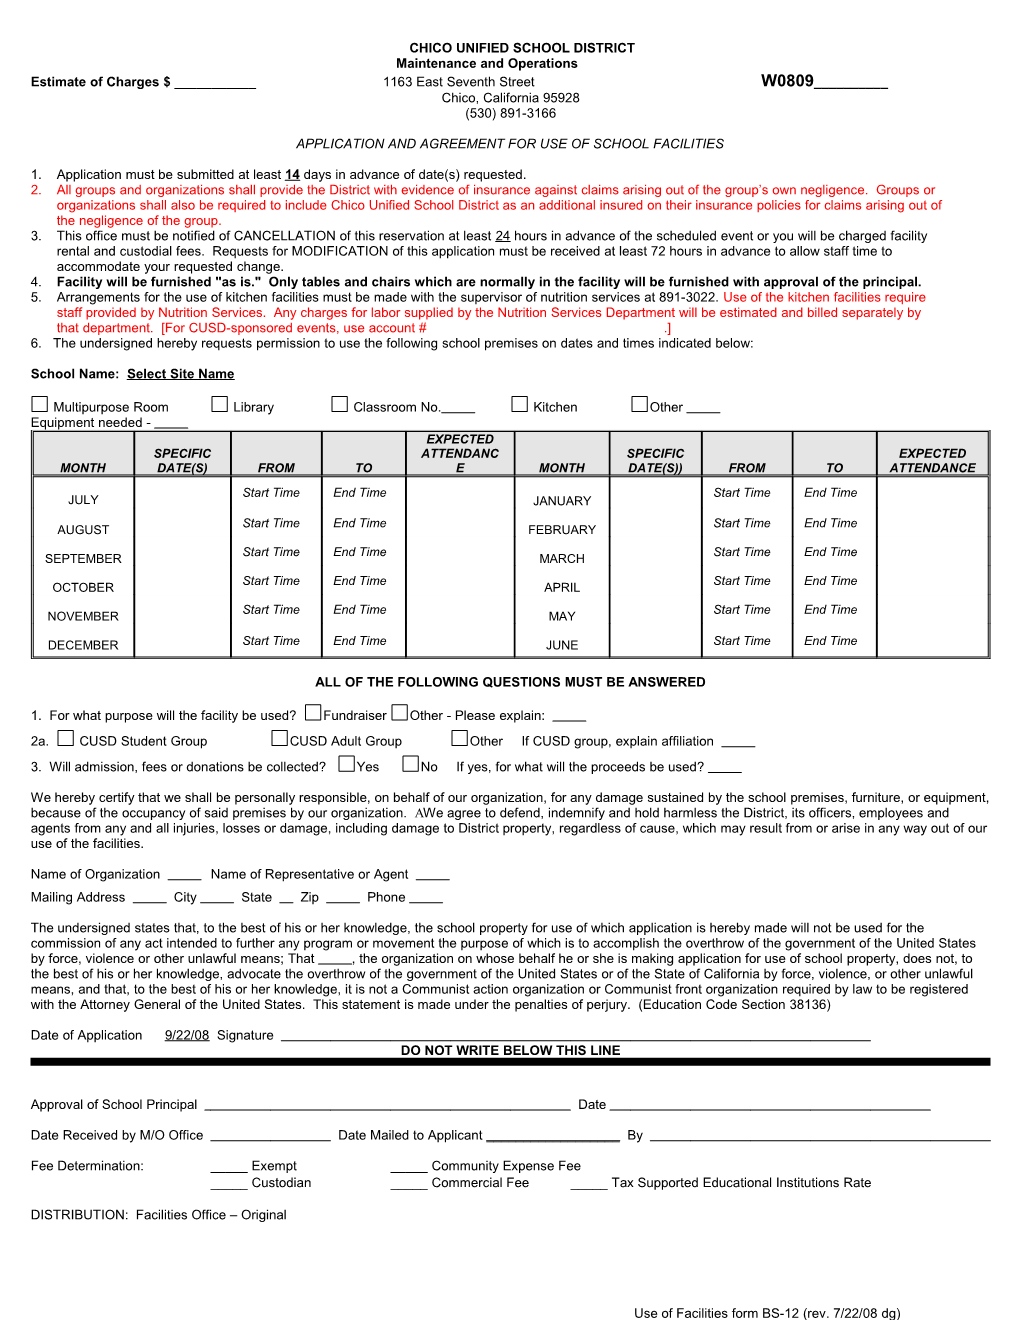 Use of Facilities Form